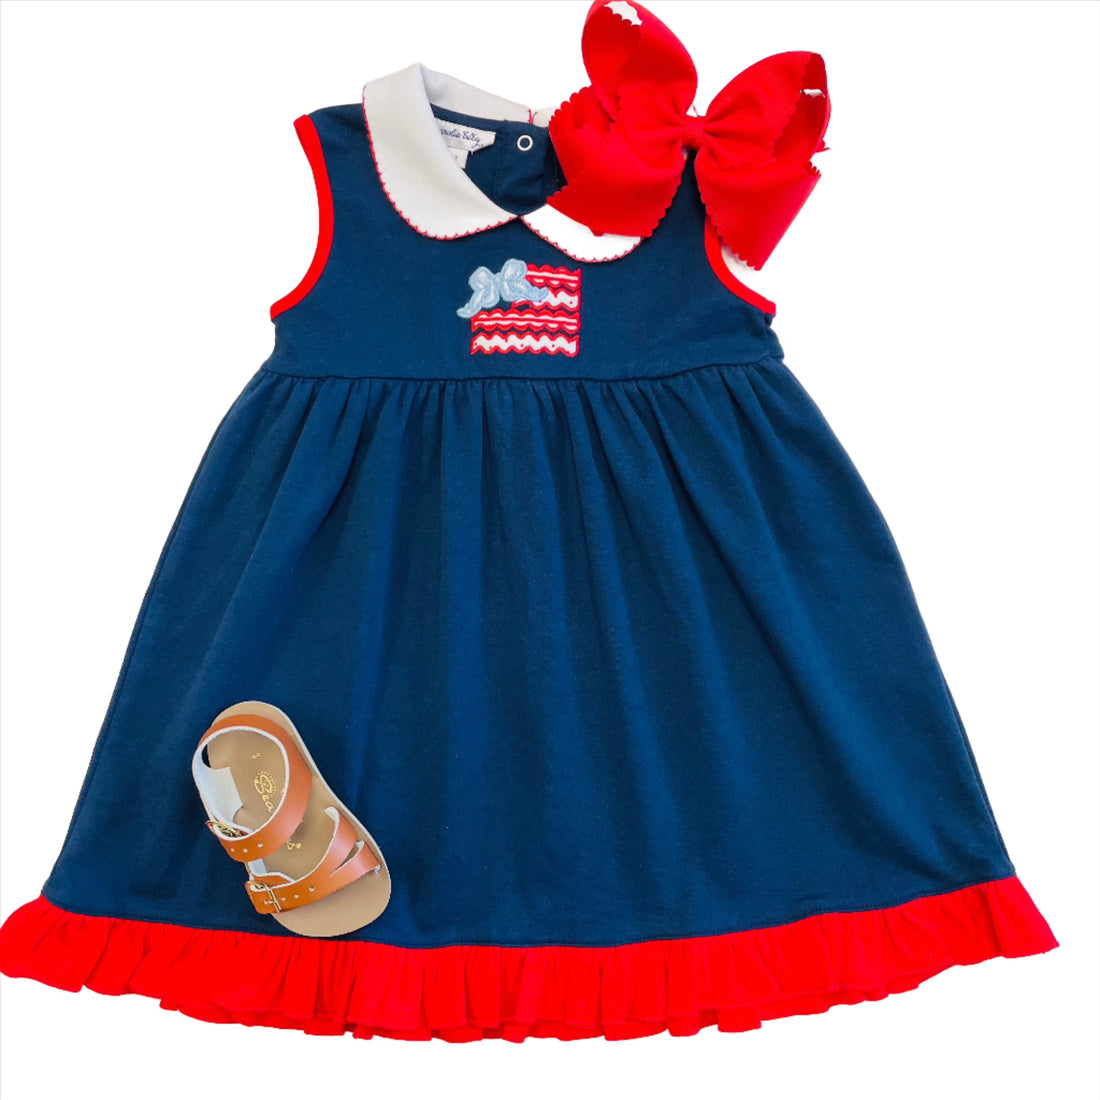 Magnolia Baby Red White & Cute Collared Dress